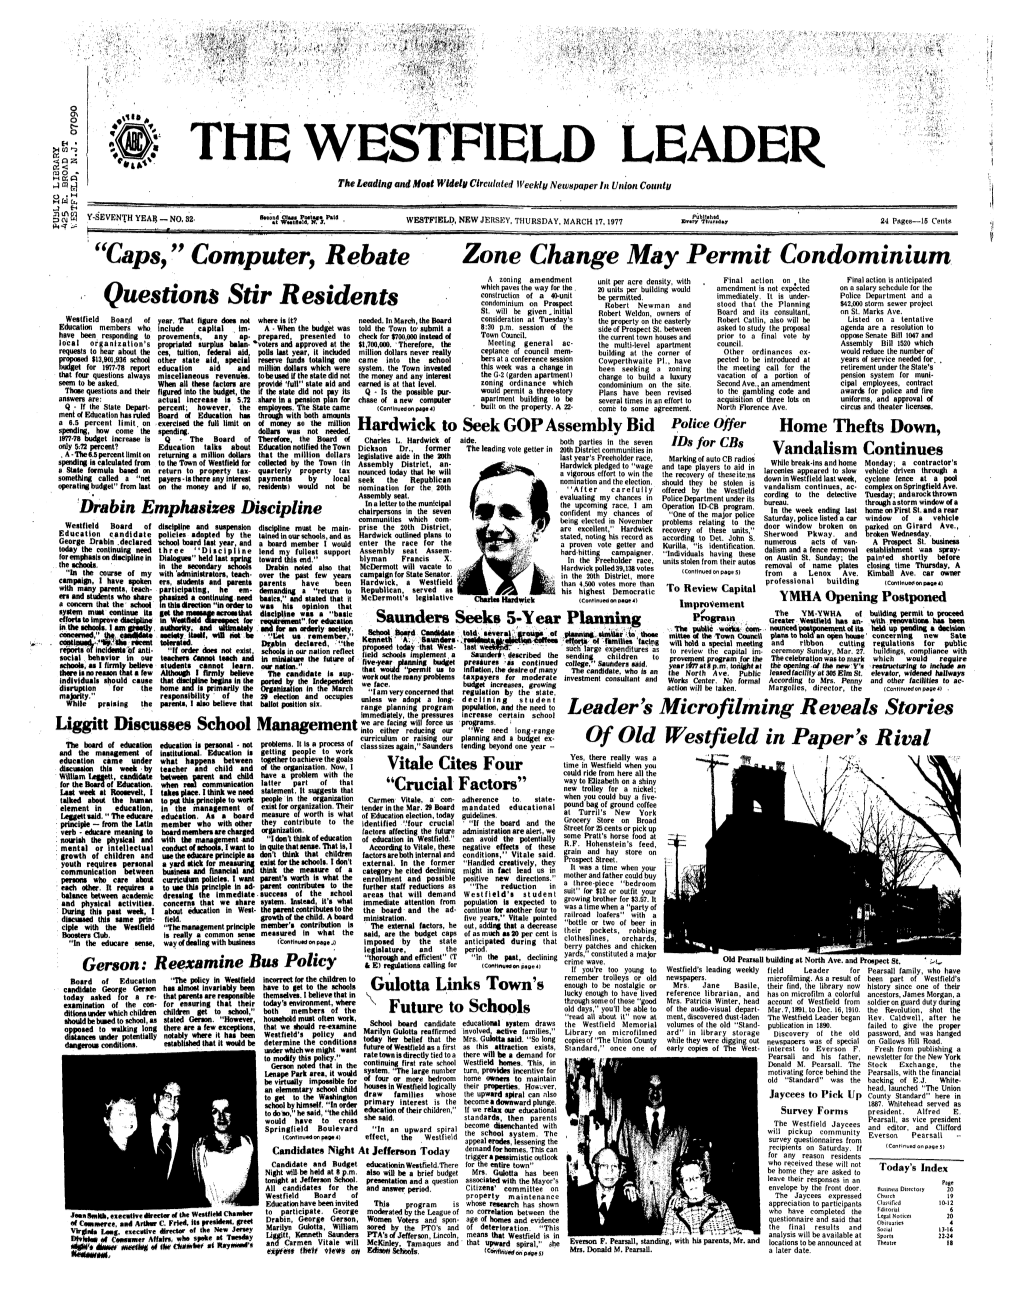 THE WESTFIELD LEADER the Leading and Mott Widely Circulated Weekly Newspaper in Union County